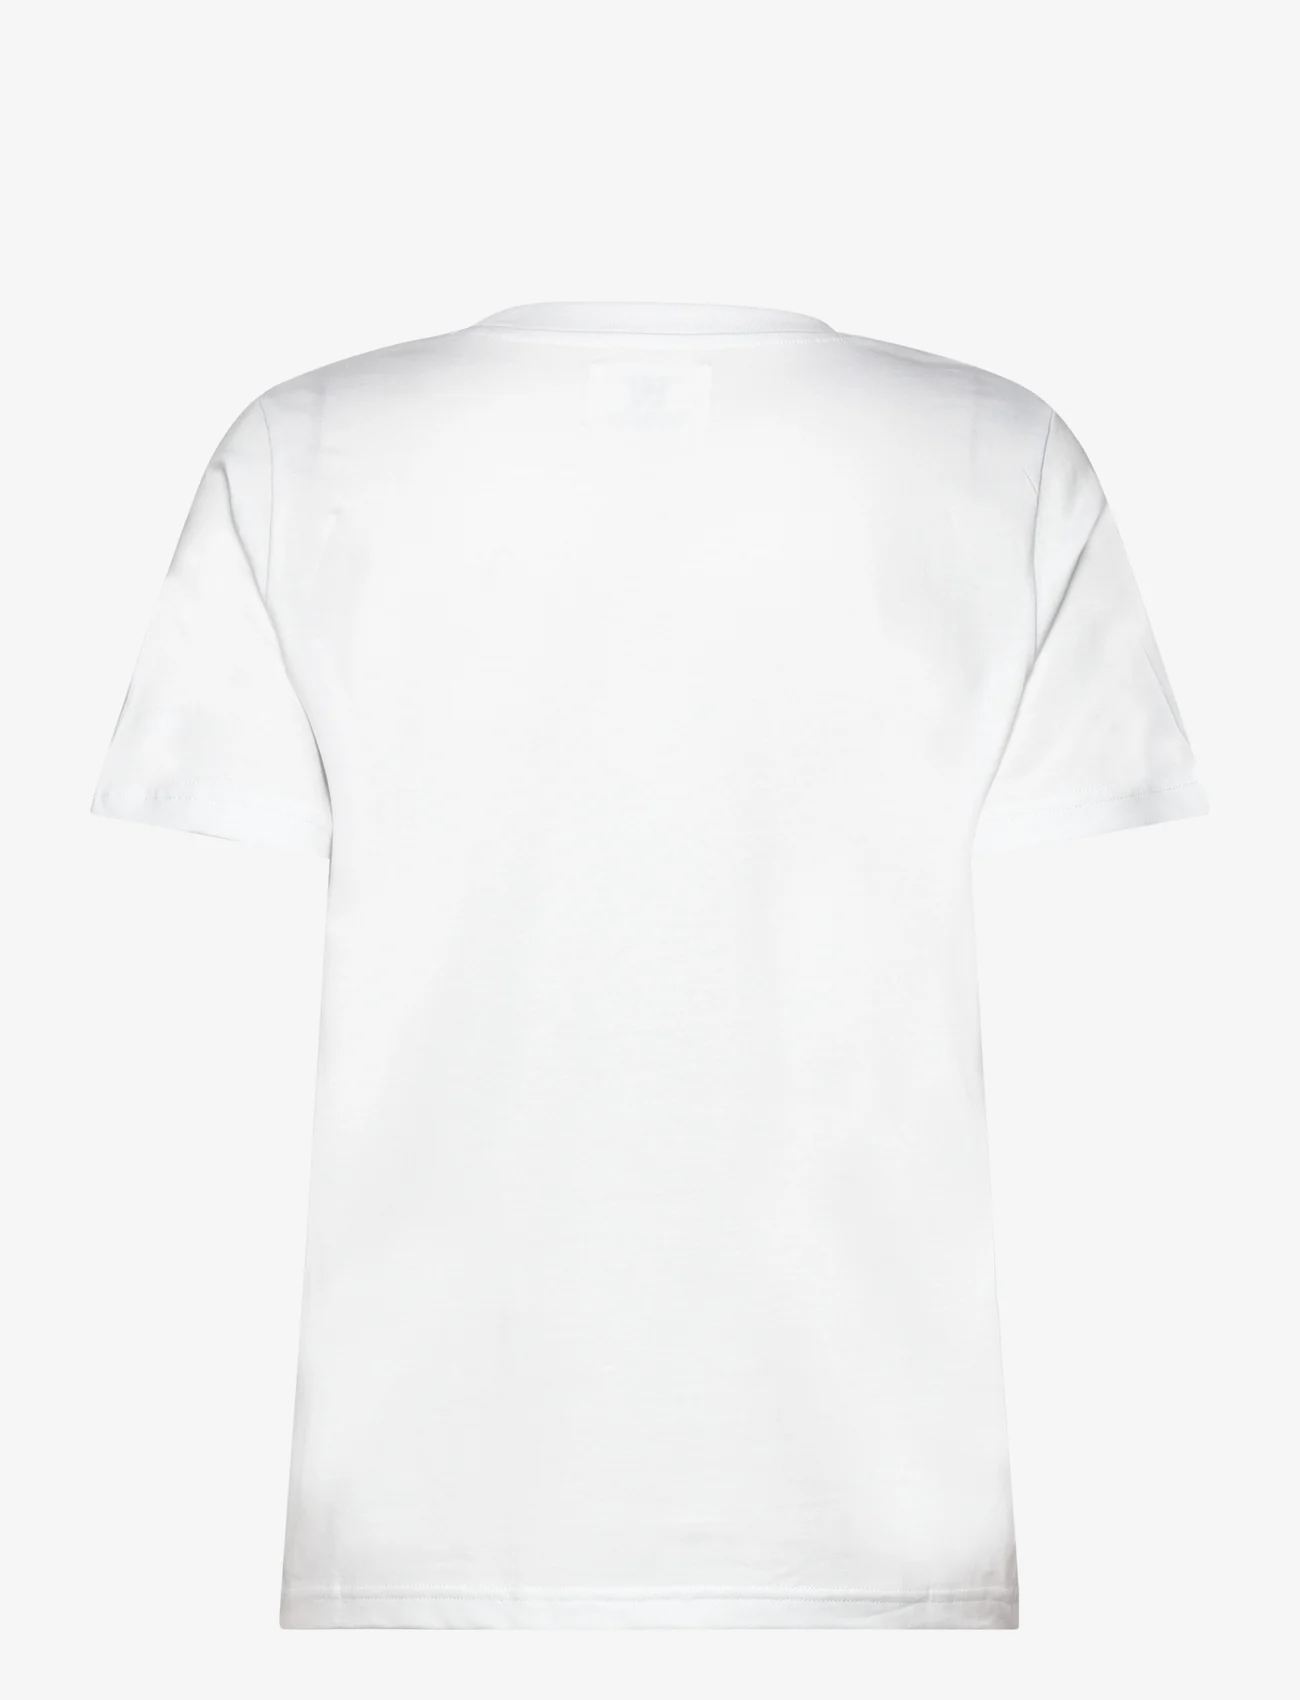 Double A by Wood Wood - Mia T-shirt - t-shirts & tops - white - 1